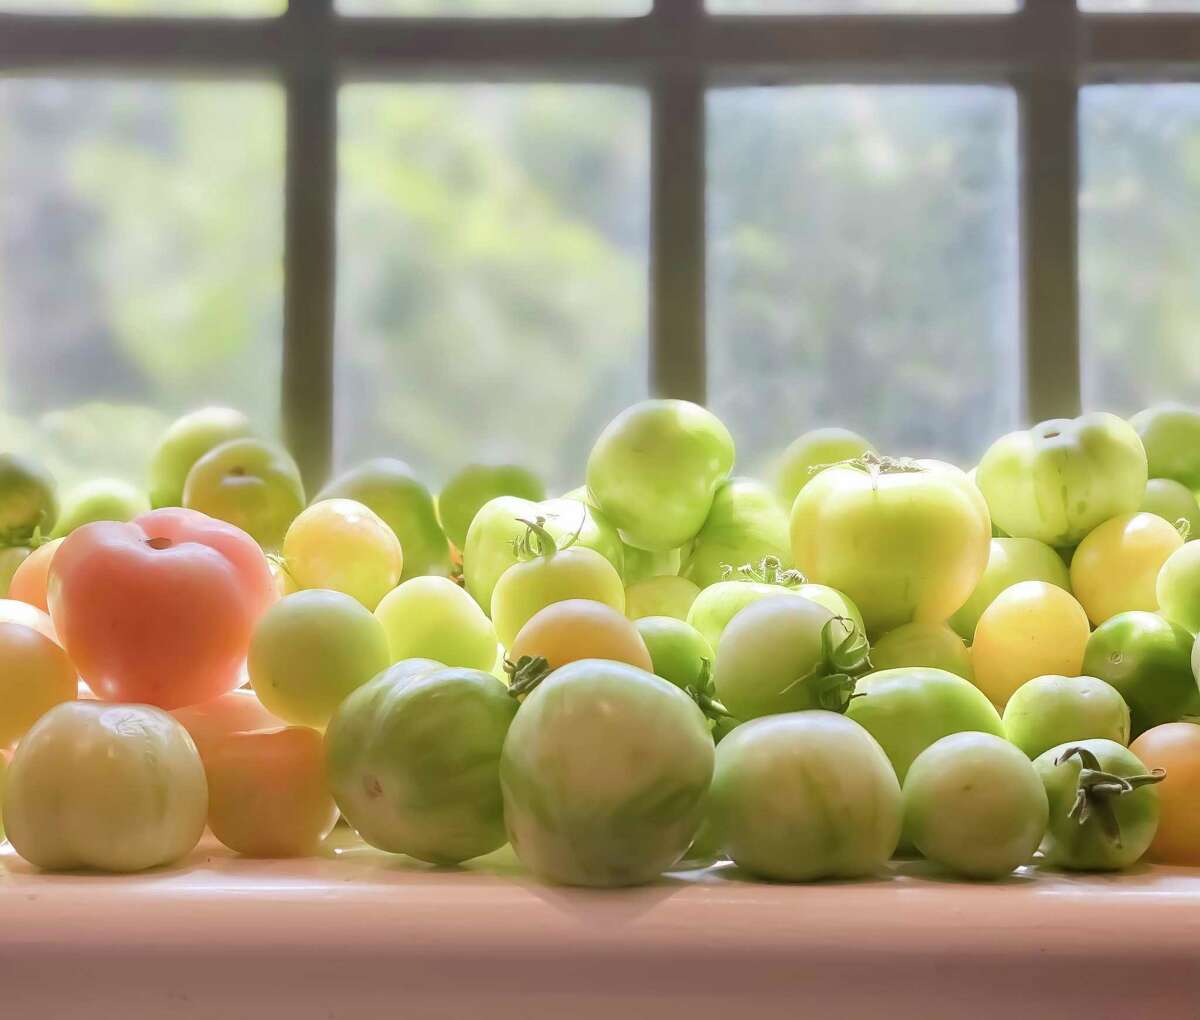 Storing underripe tomatoes in a sunny window can help them ripen faster.